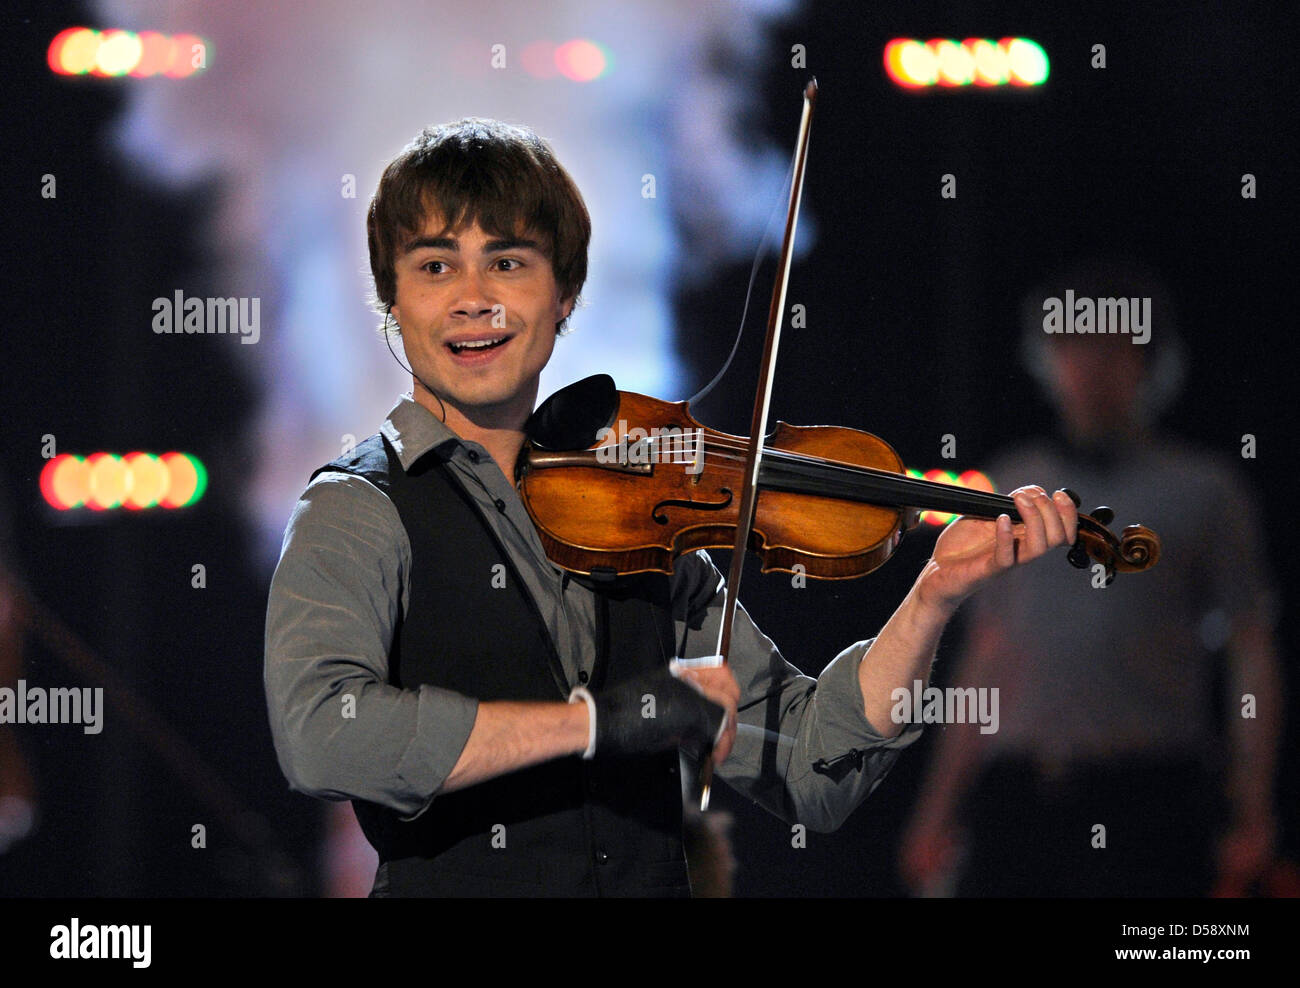 Alexander Rybak from Norway, winner of the 2009 edition of the Eurovision Song Contest, performs during the first dress-rehearsal of the Eurovision Song Contest Final in Oslo, Norway, 28 May 2010. Photo: Jörg Carstensen dpa  +++(c) dpa - Bildfunk+++ Stock Photo